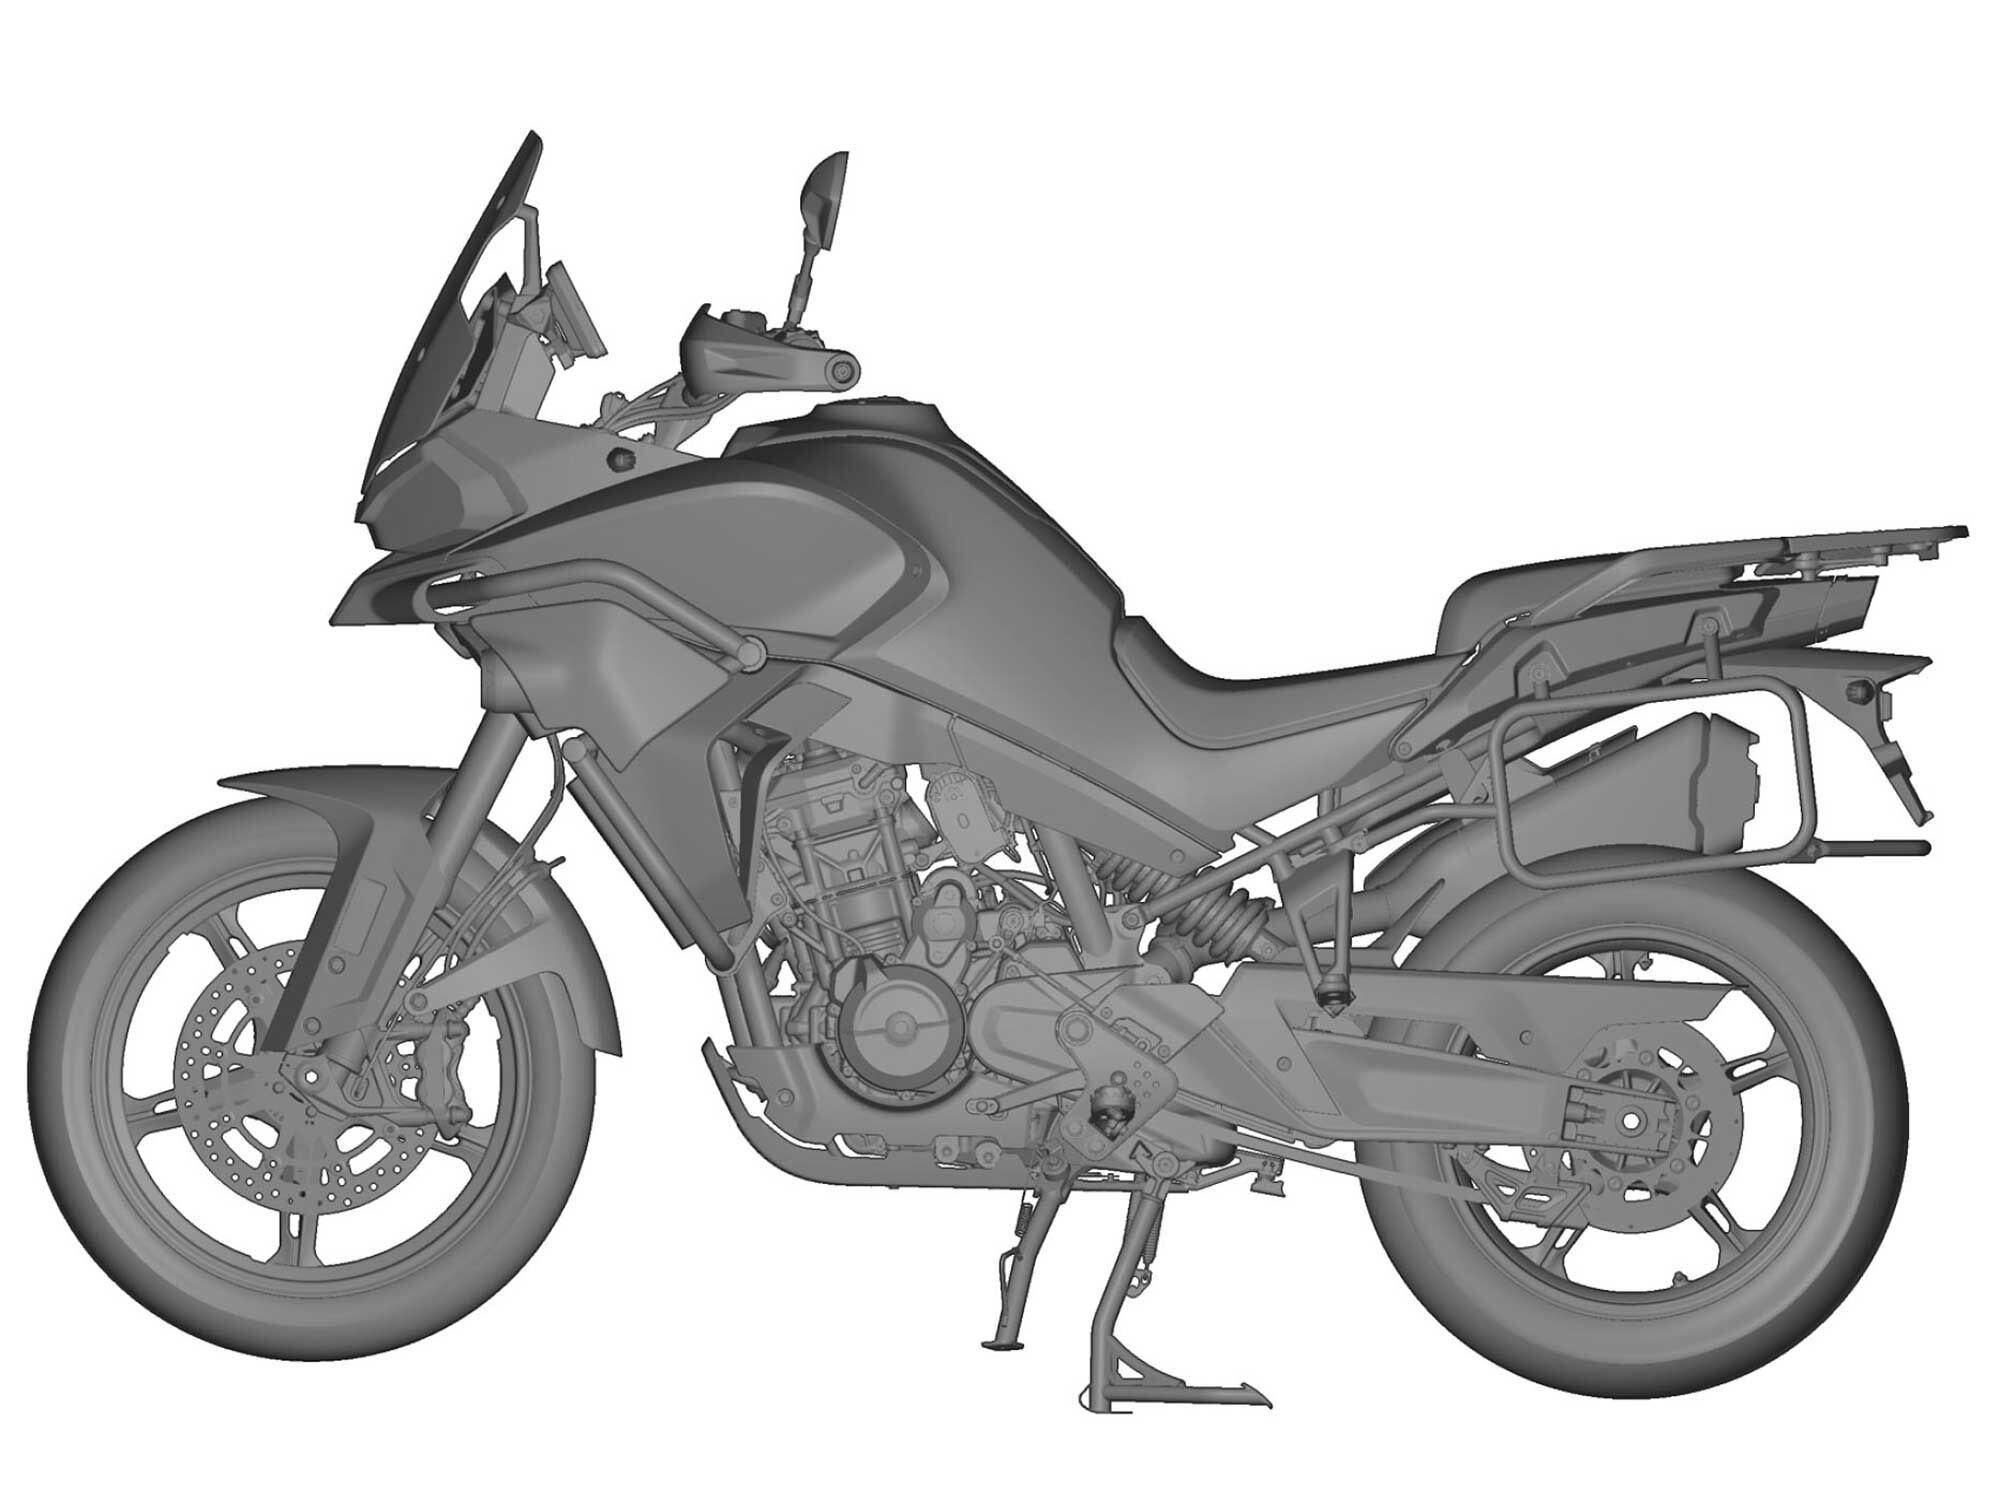 The MT800 design renders clearly show an adventure-style motorcycle based on the KTM Adventure.